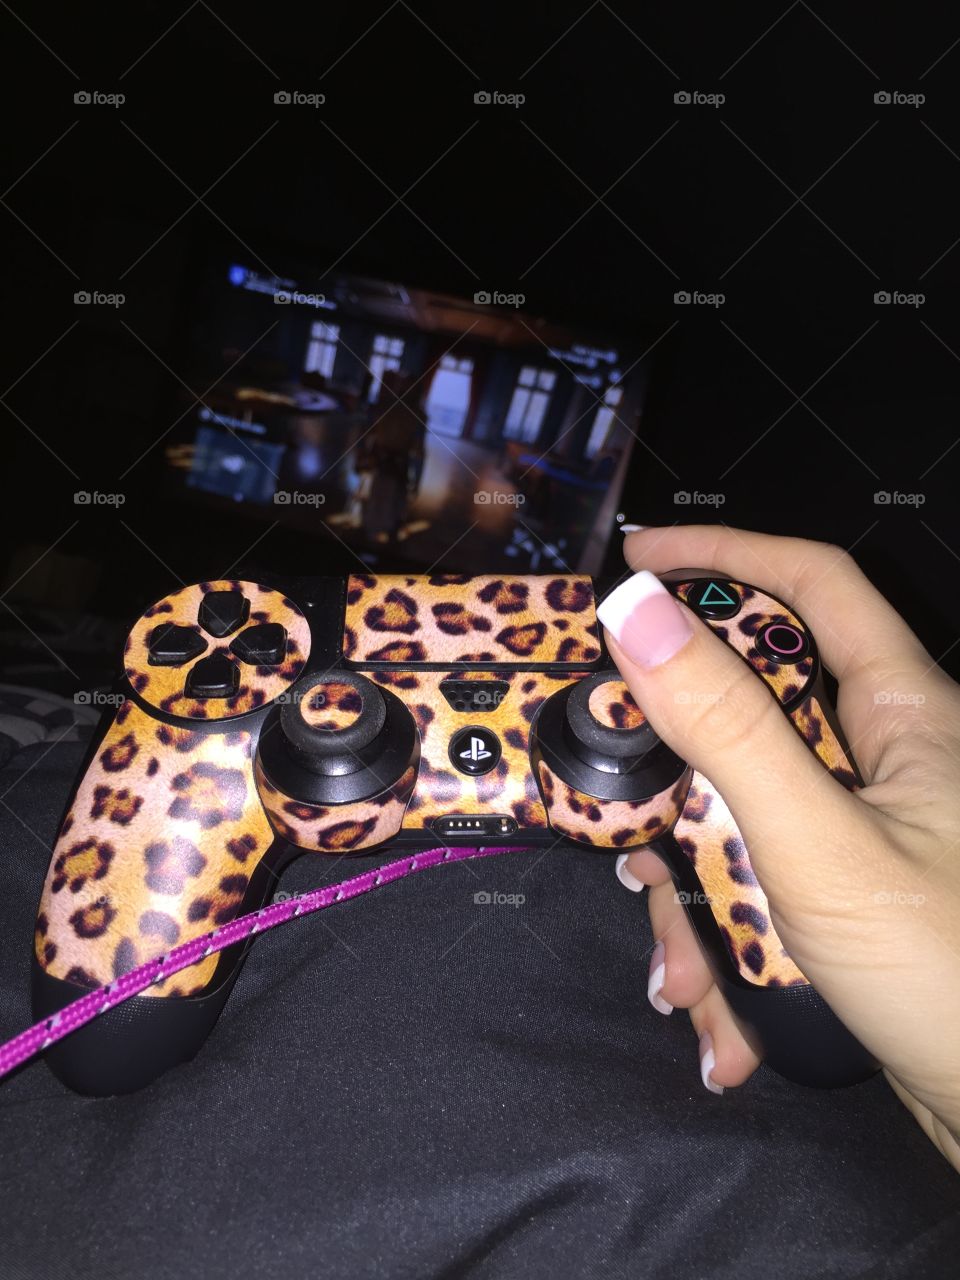 PS4. Gaming is for girls too. Look pretty, play hard.